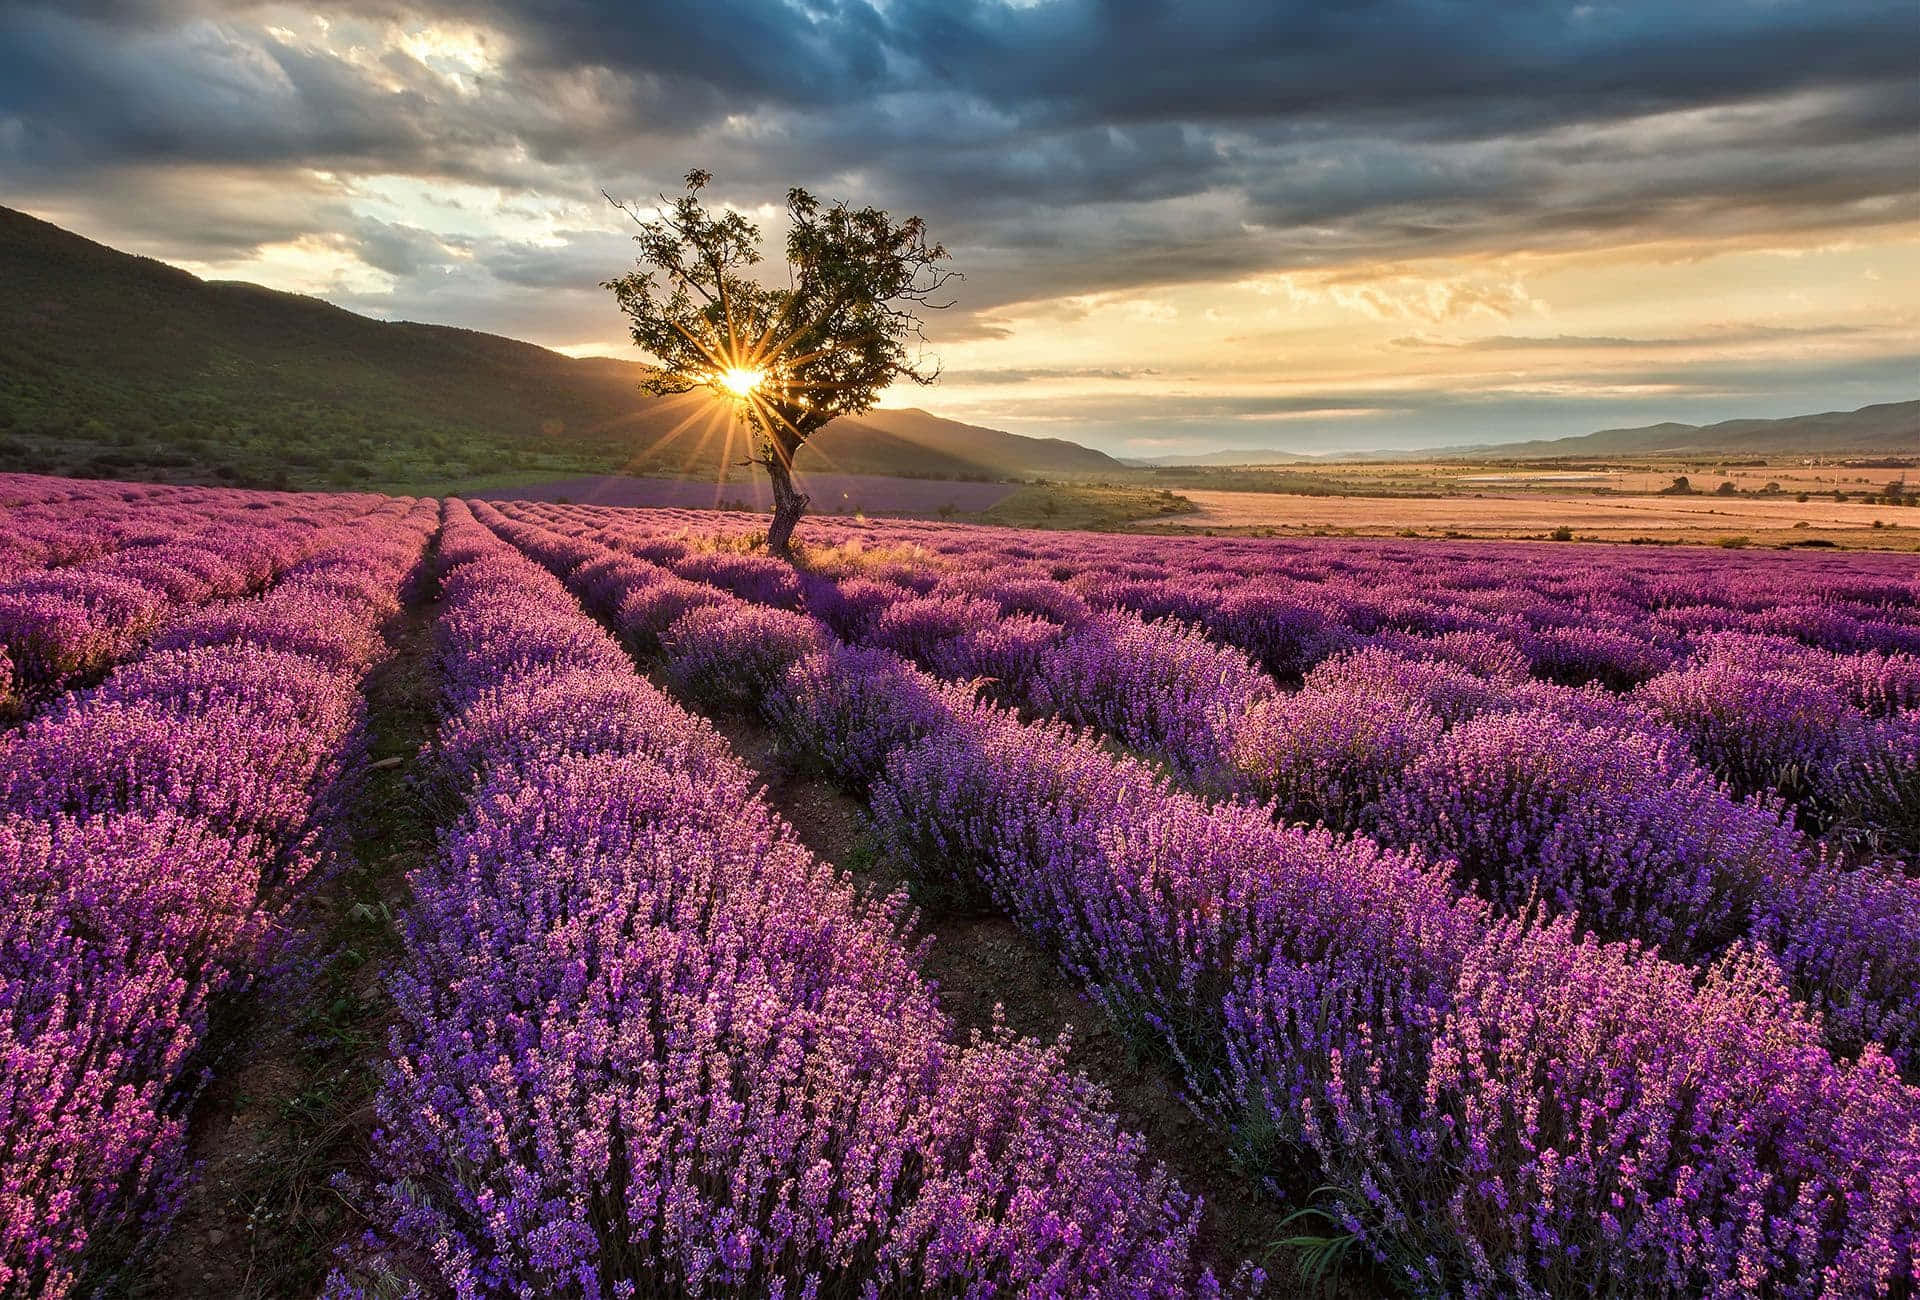 Sunrise On A Lavender Field At The Mountain Foot Wallpaper